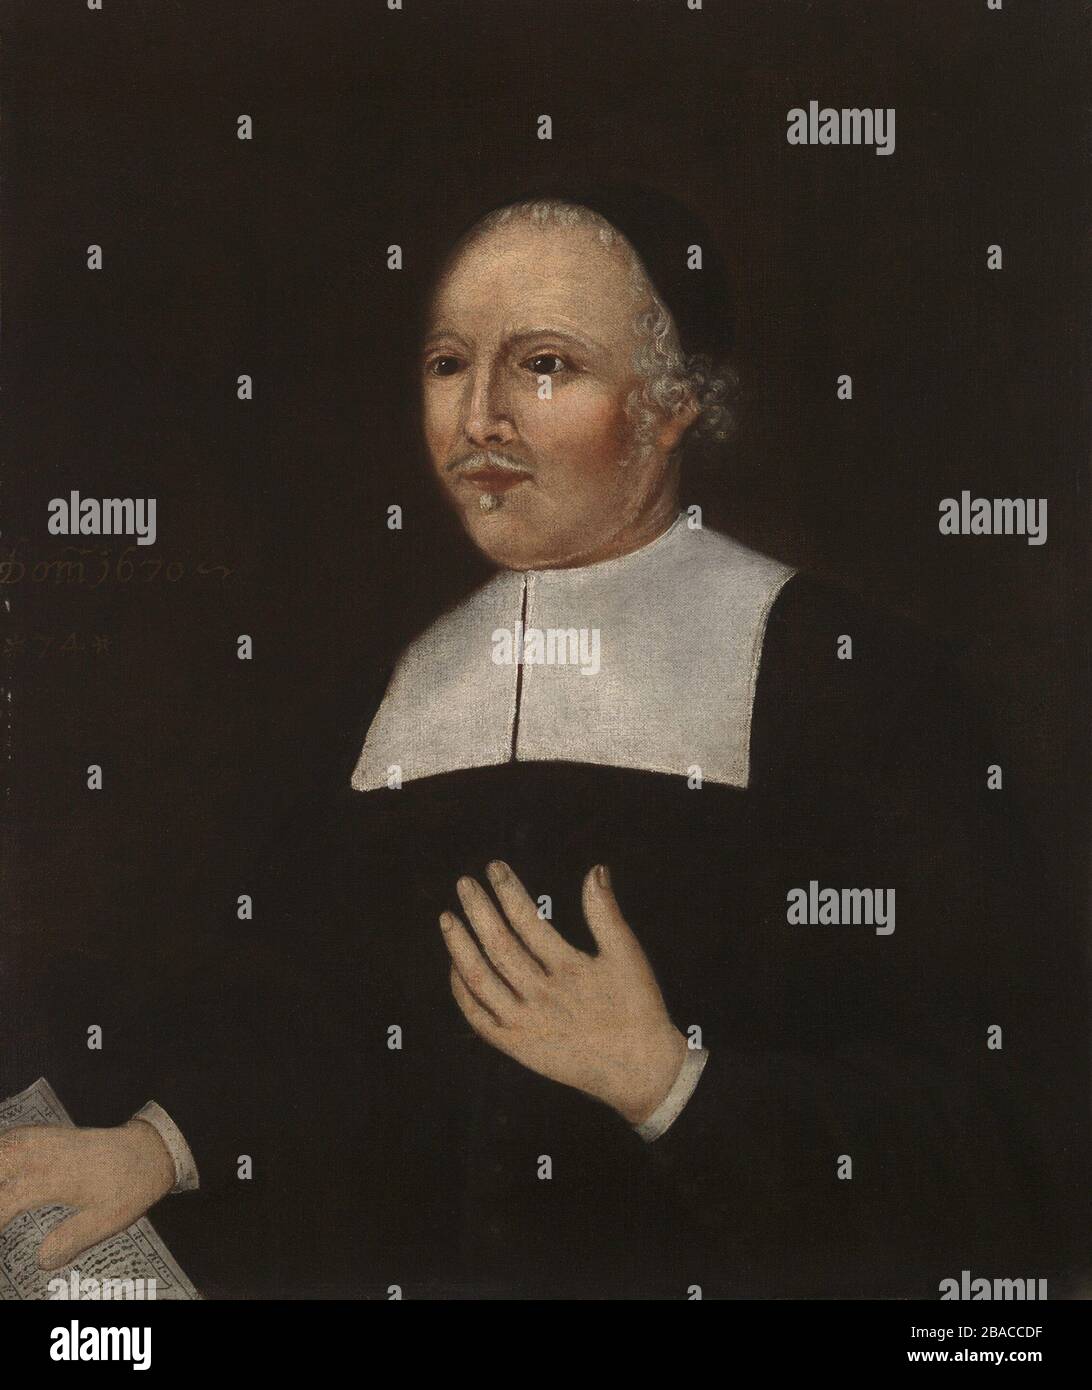 John Davenport, a Puritan clergyman, emigrated with his congregation to Boston in 1633 during the 'Great Puritan Migration.' The following year they moved and founded the New Haven Colony, where Davenport established the 'First Church', in which he preached for 30 years  (BSLOC 2020 1 174) Stock Photo